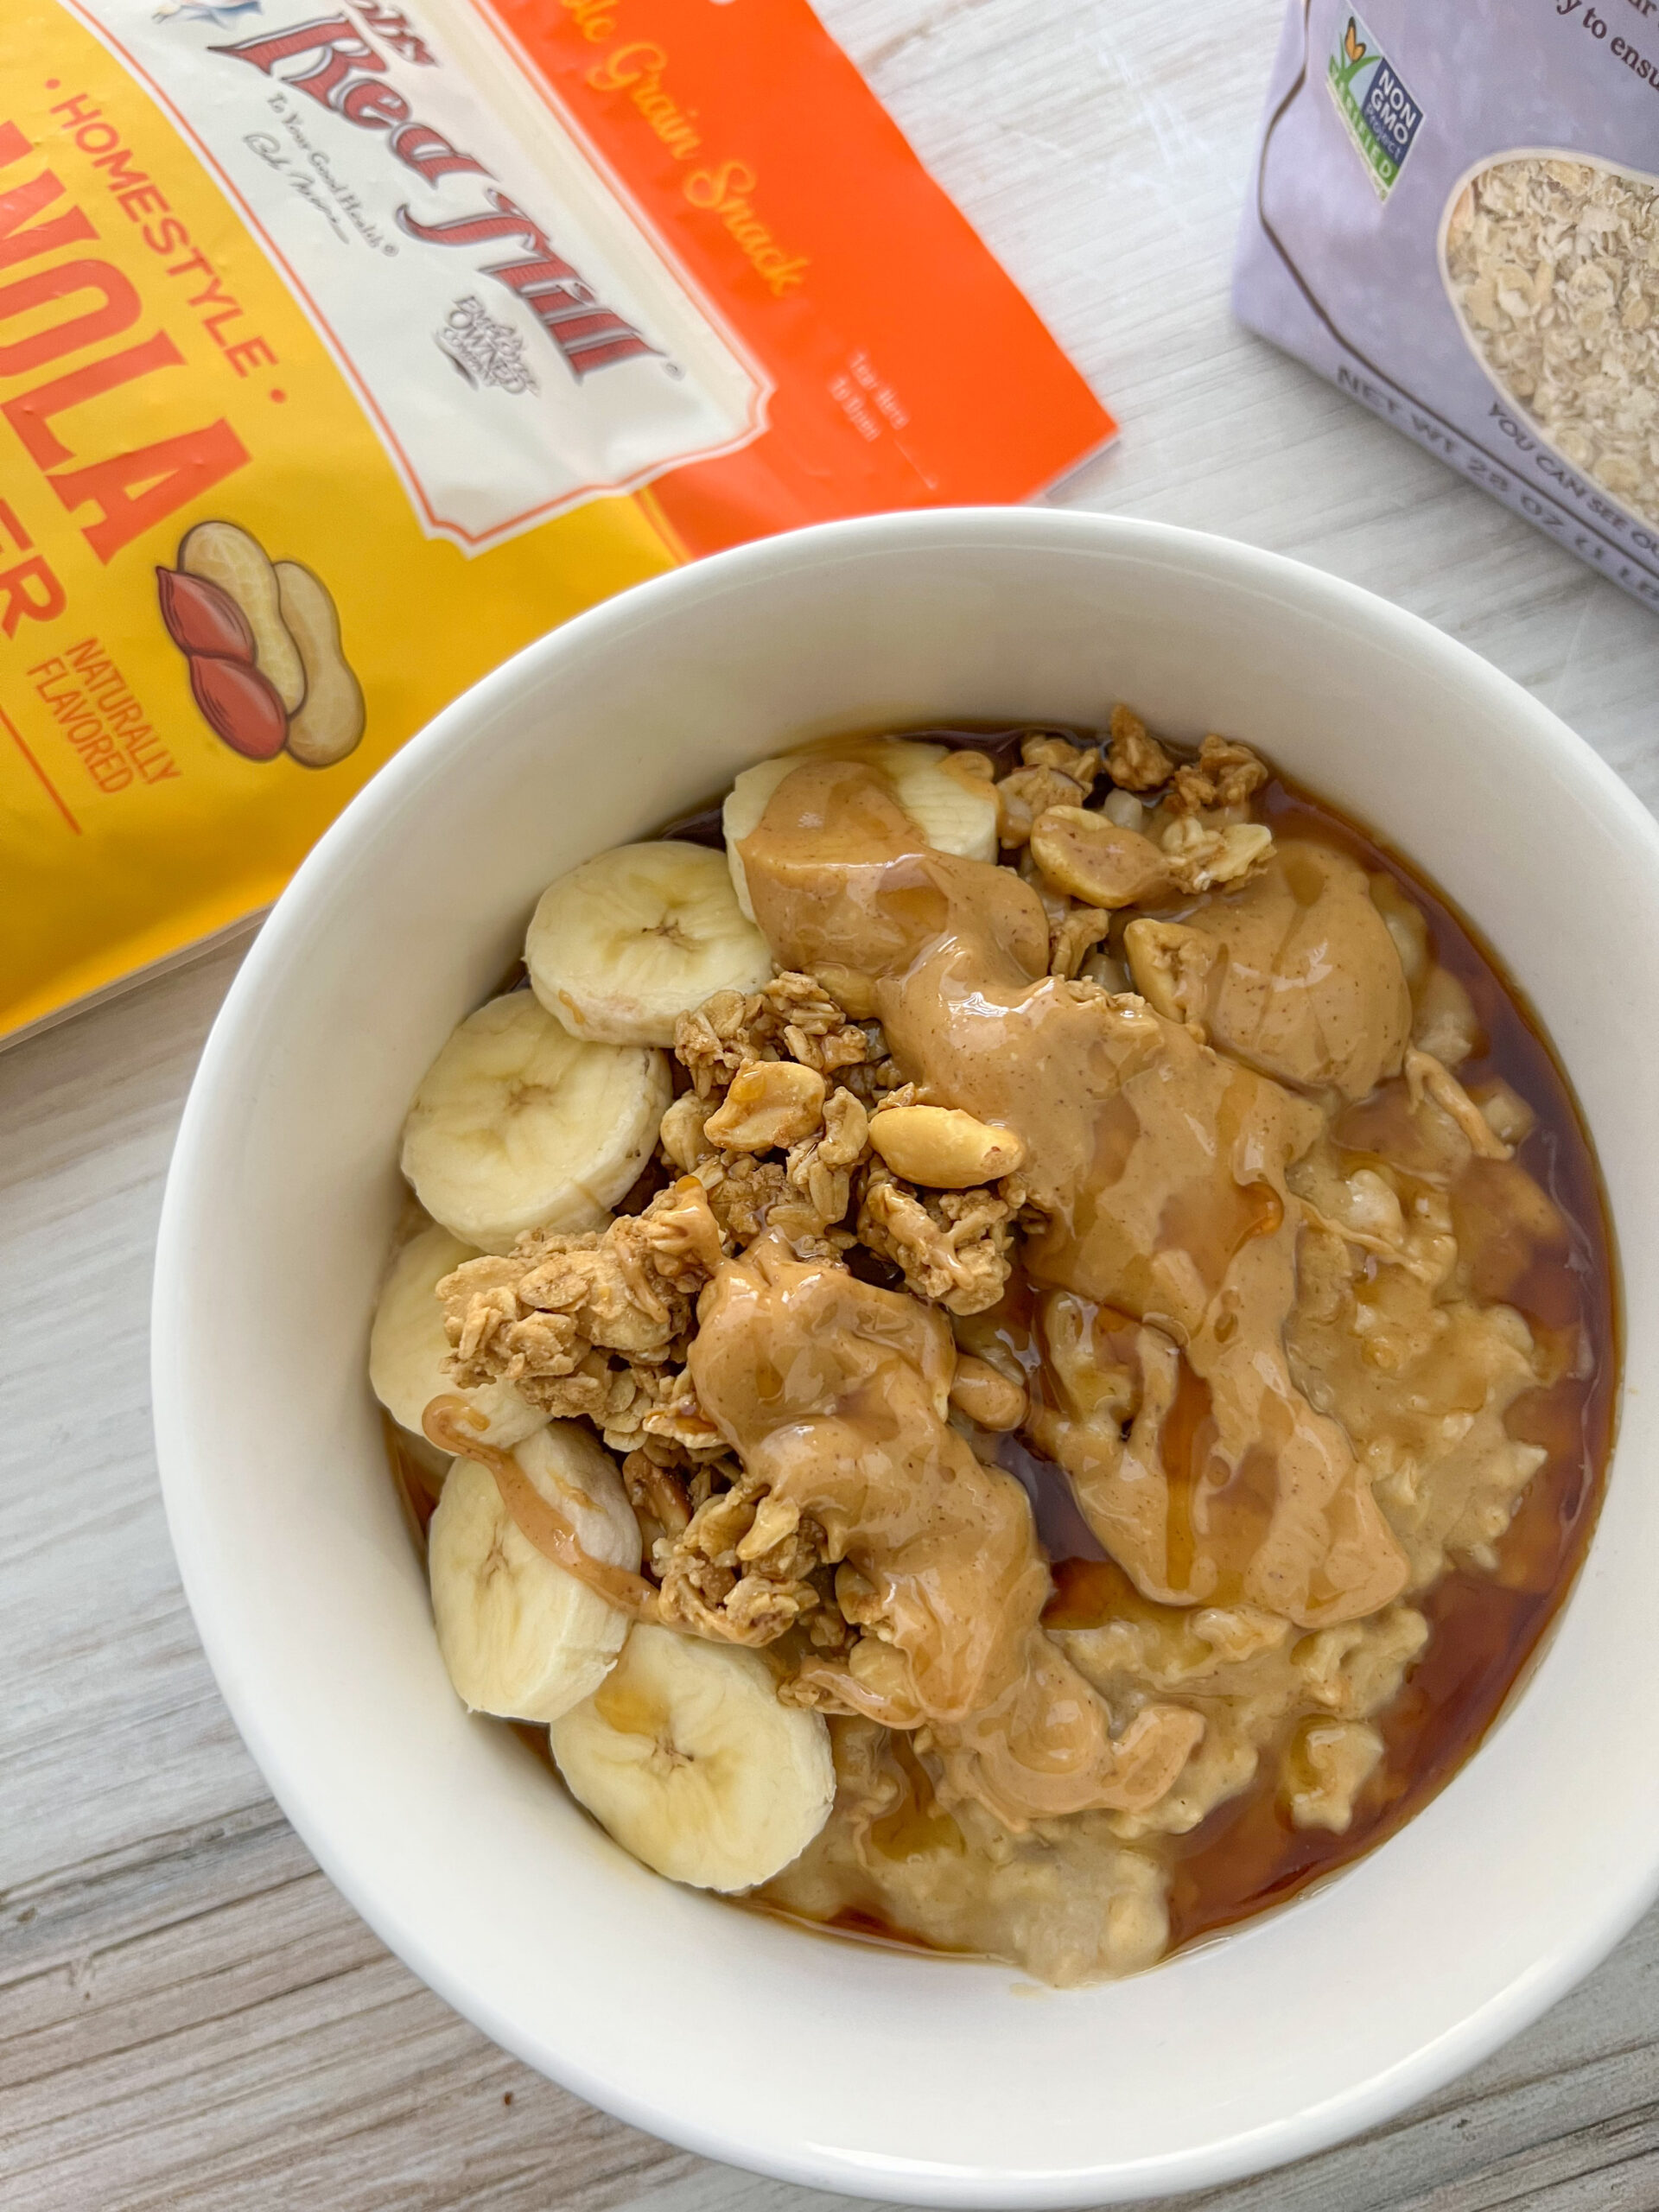 Peanut butter oatmeal in a white bowl with package of granola and oats in the background. 